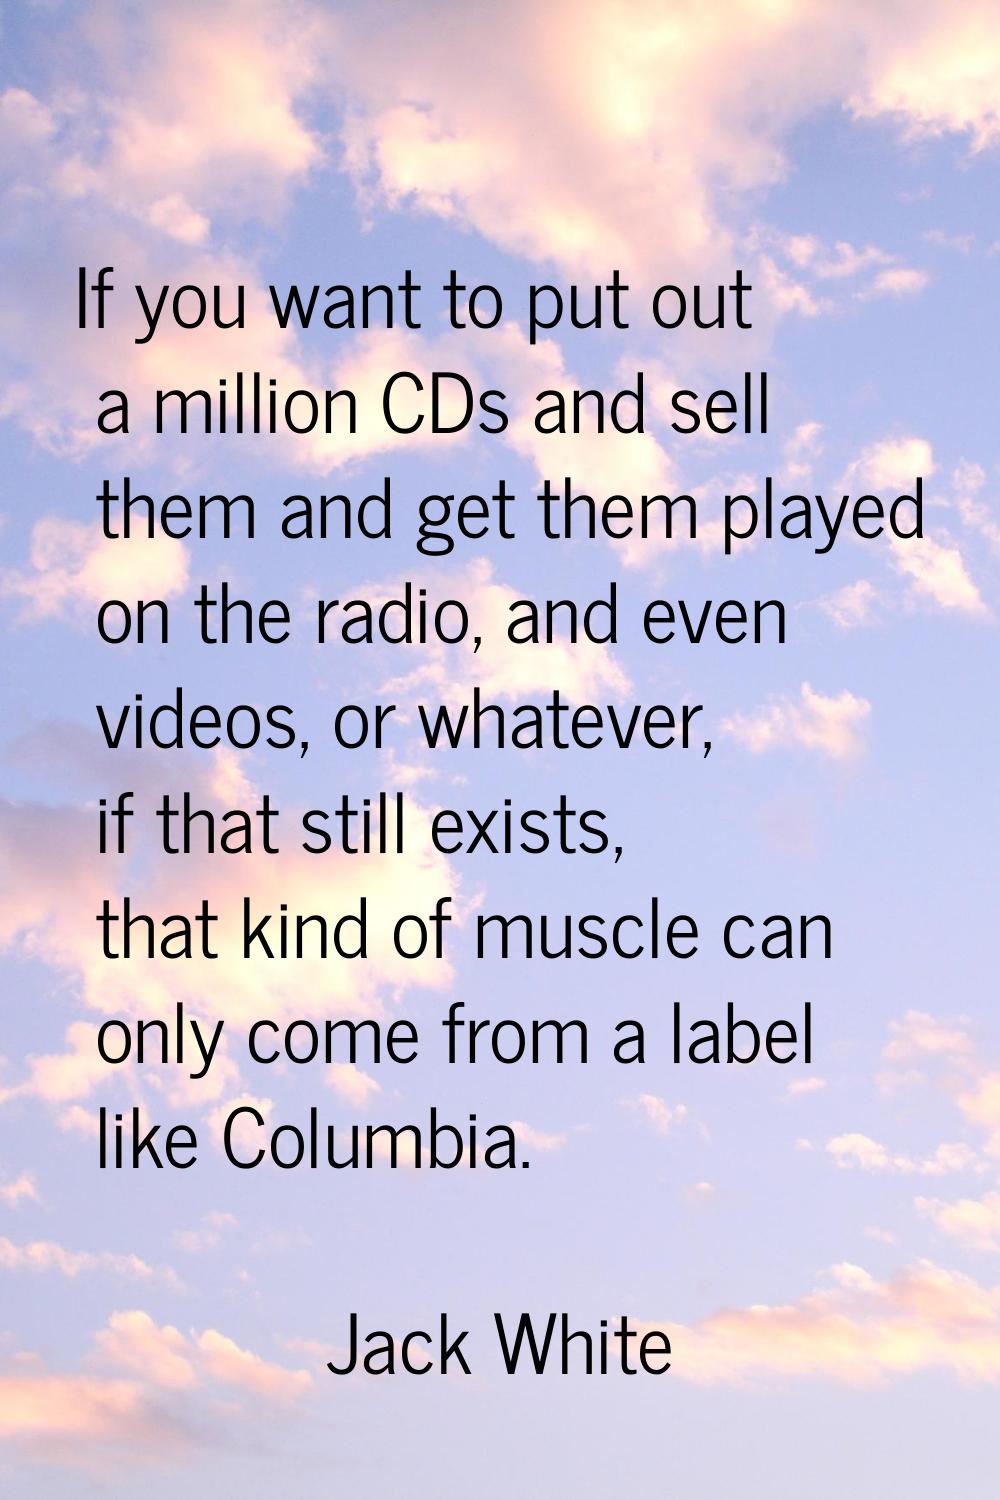 If you want to put out a million CDs and sell them and get them played on the radio, and even video